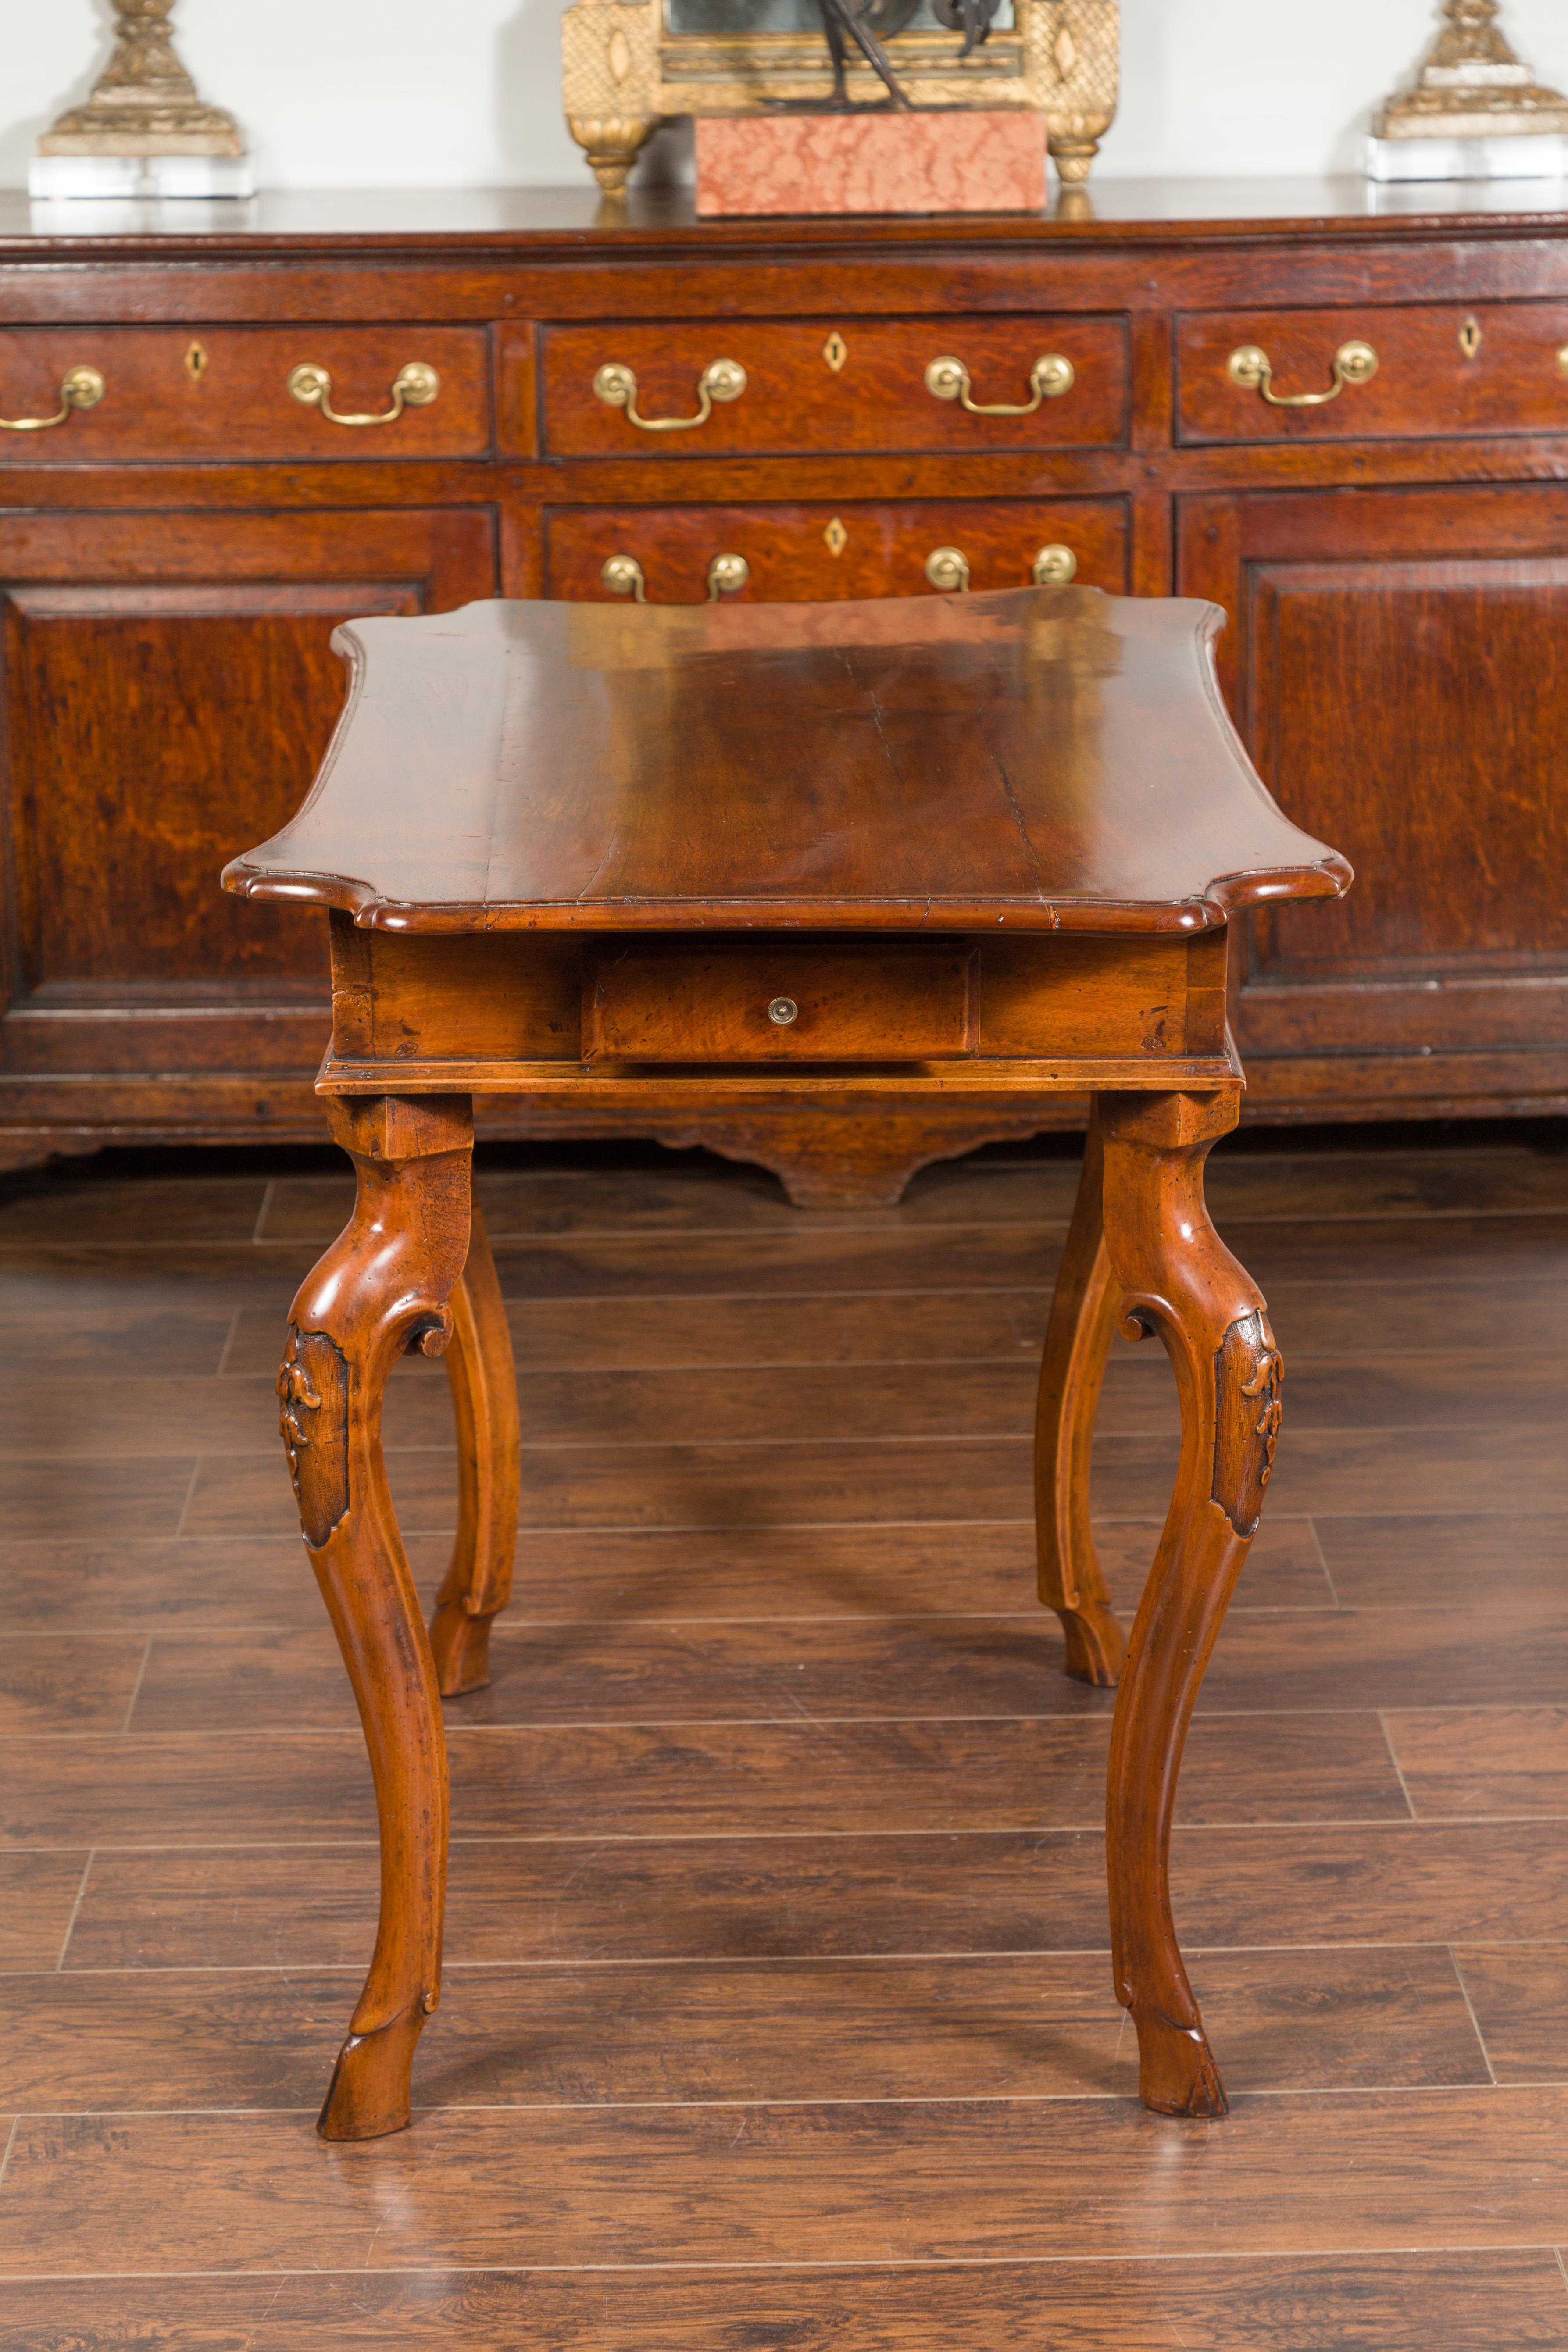 Northern Italian 1720s Régence Walnut Side Table with Four Drawers and Cabrioles 11